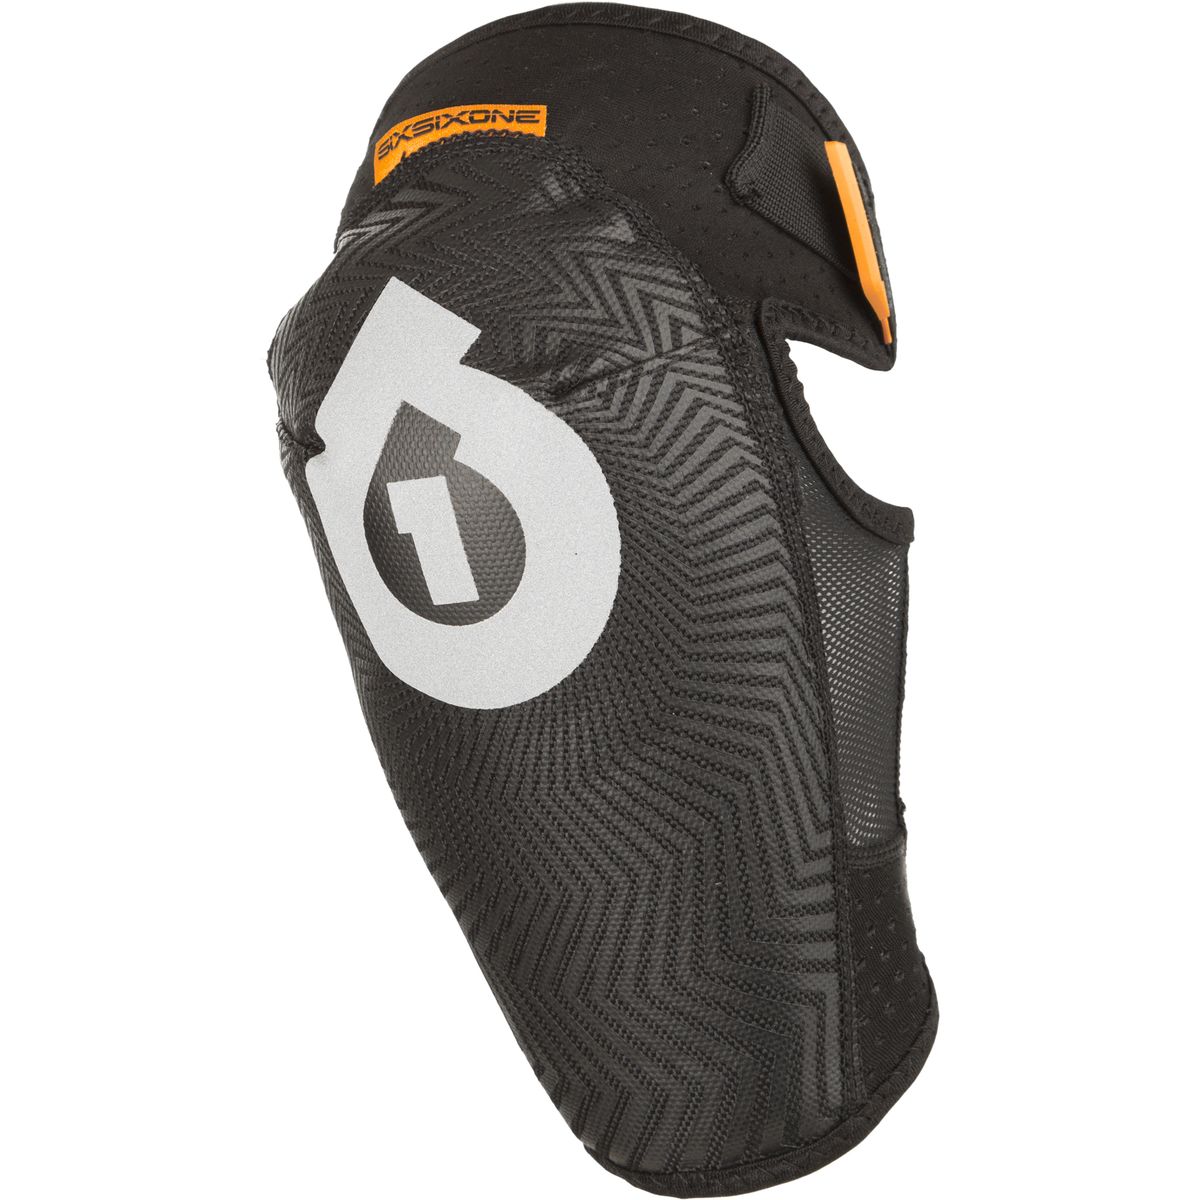 Six Six One Comp AM Elbow Guards Youth